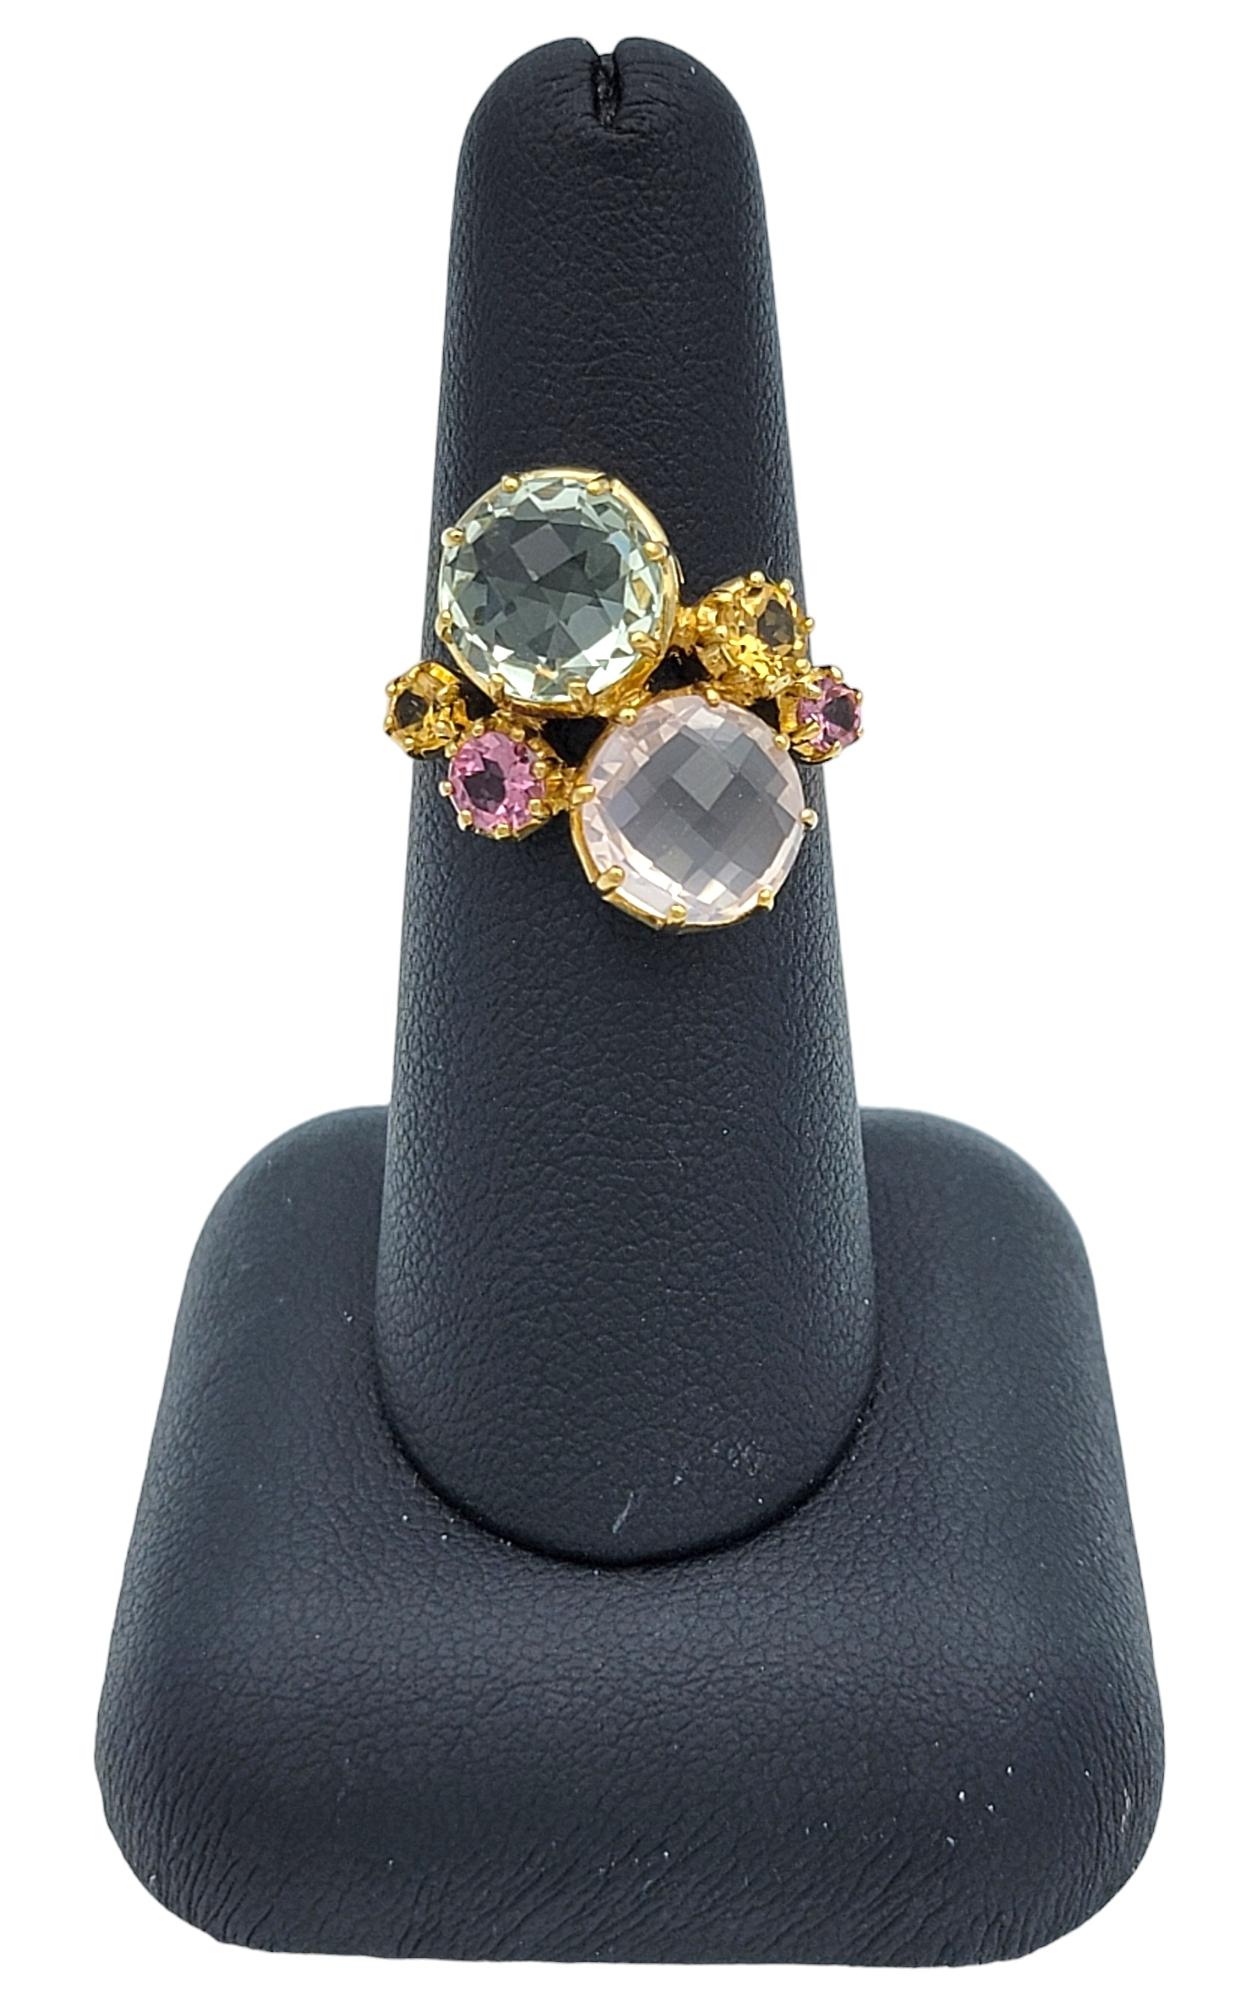 Multi-Colored Quartz Gemstone Cluster Cocktail Ring Set in 10 Karat Yellow Gold For Sale 3